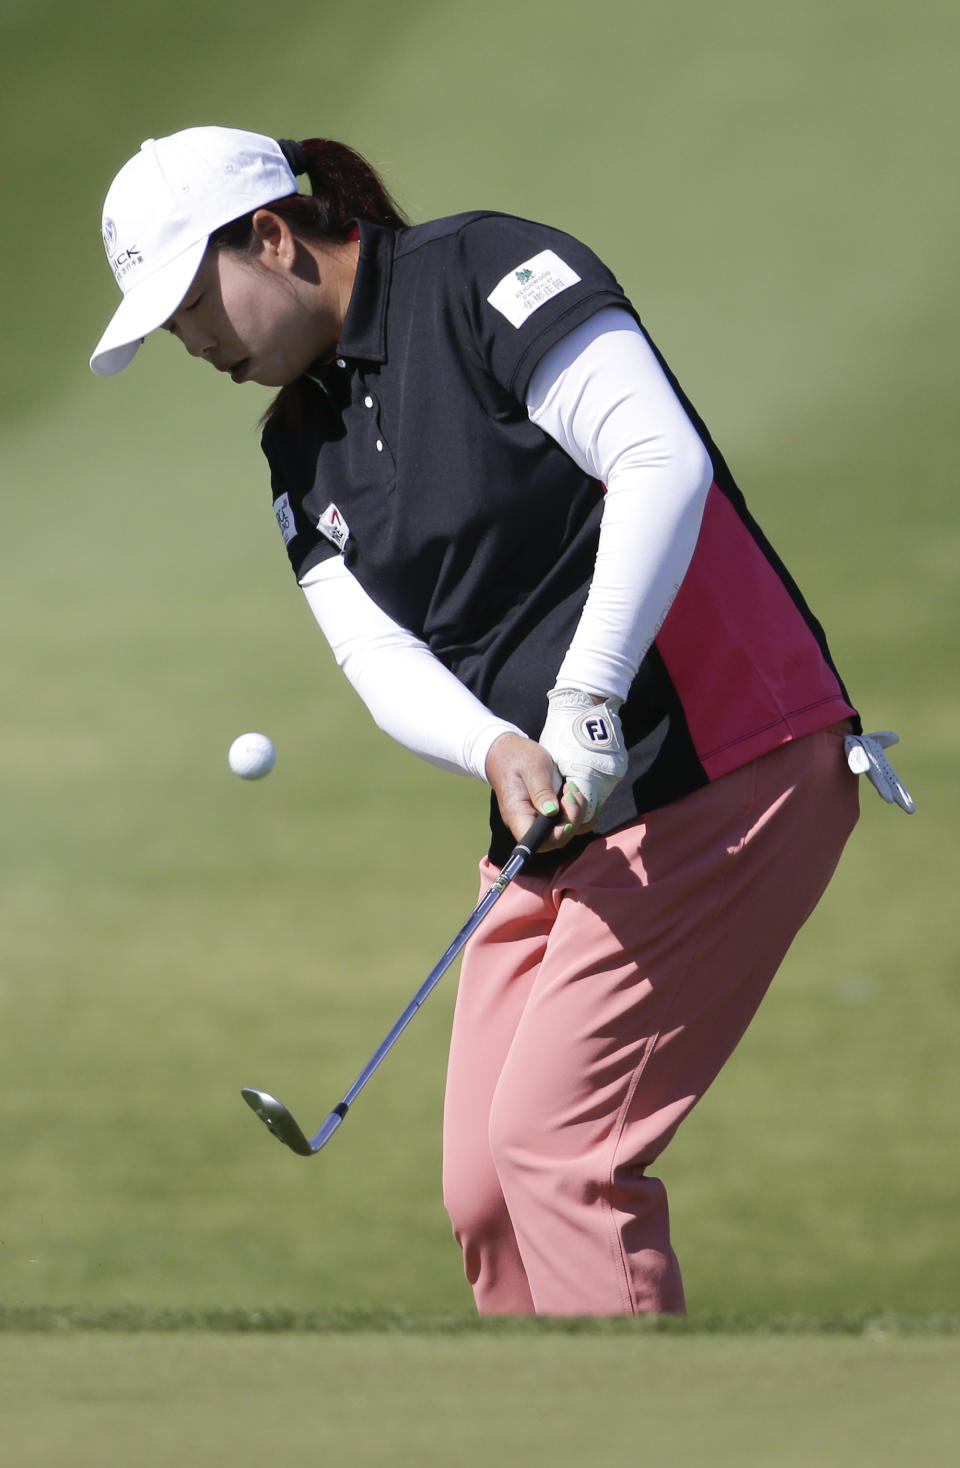 Shanshan Feng, of China, chips to the green on the ninth hole during the first round at the LPGA Kraft Nabisco Championship golf tournament Thursday, April 3, 2014 in Rancho Mirage, Calif. (AP Photo/Chris Carlson)